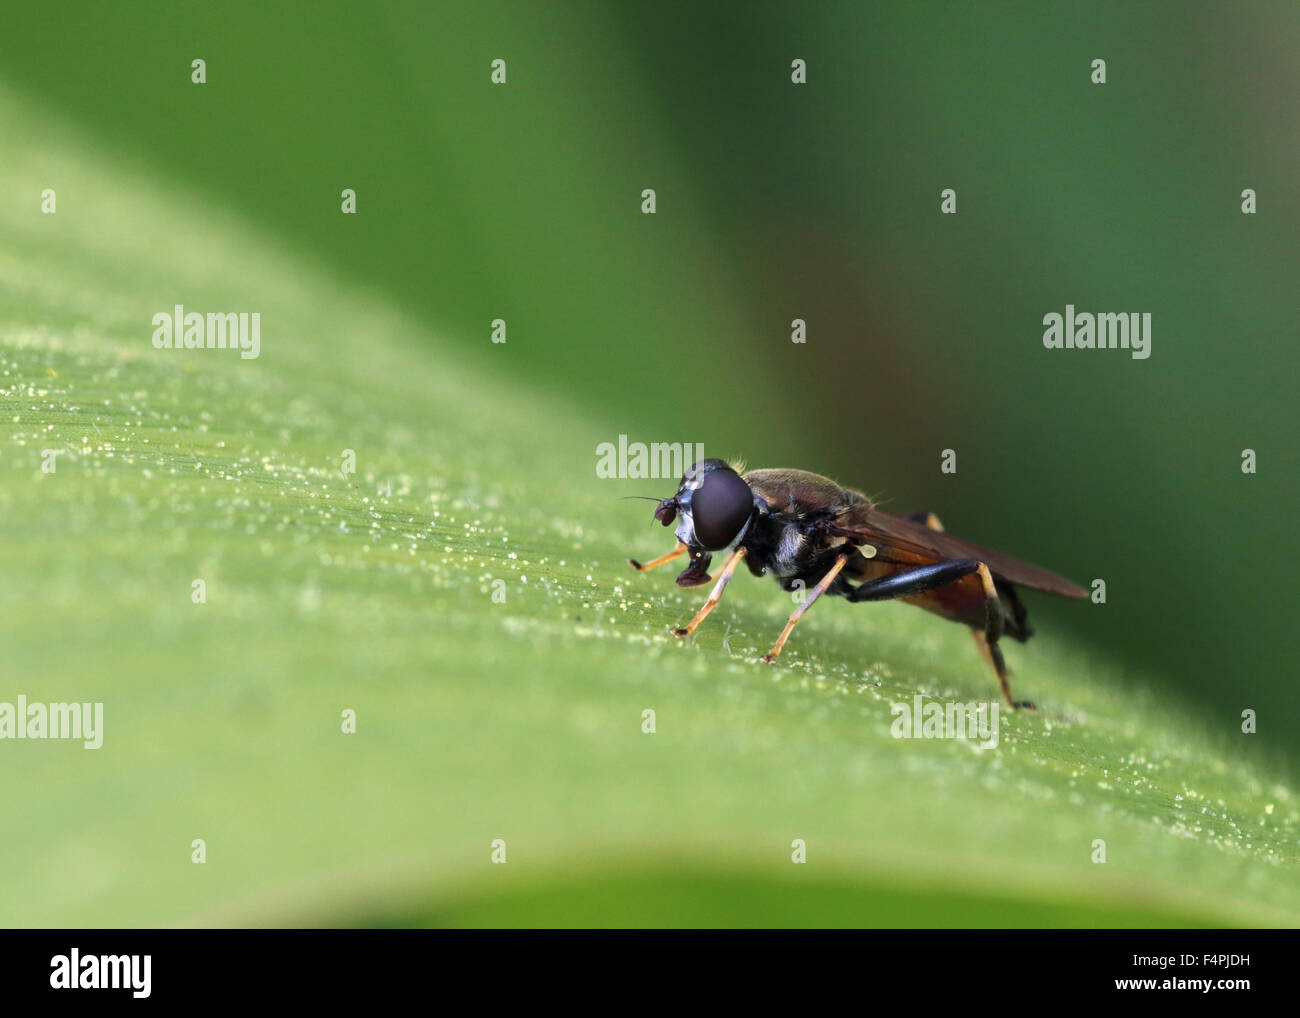 Xylota segnis fly resting on maize plant Stock Photo